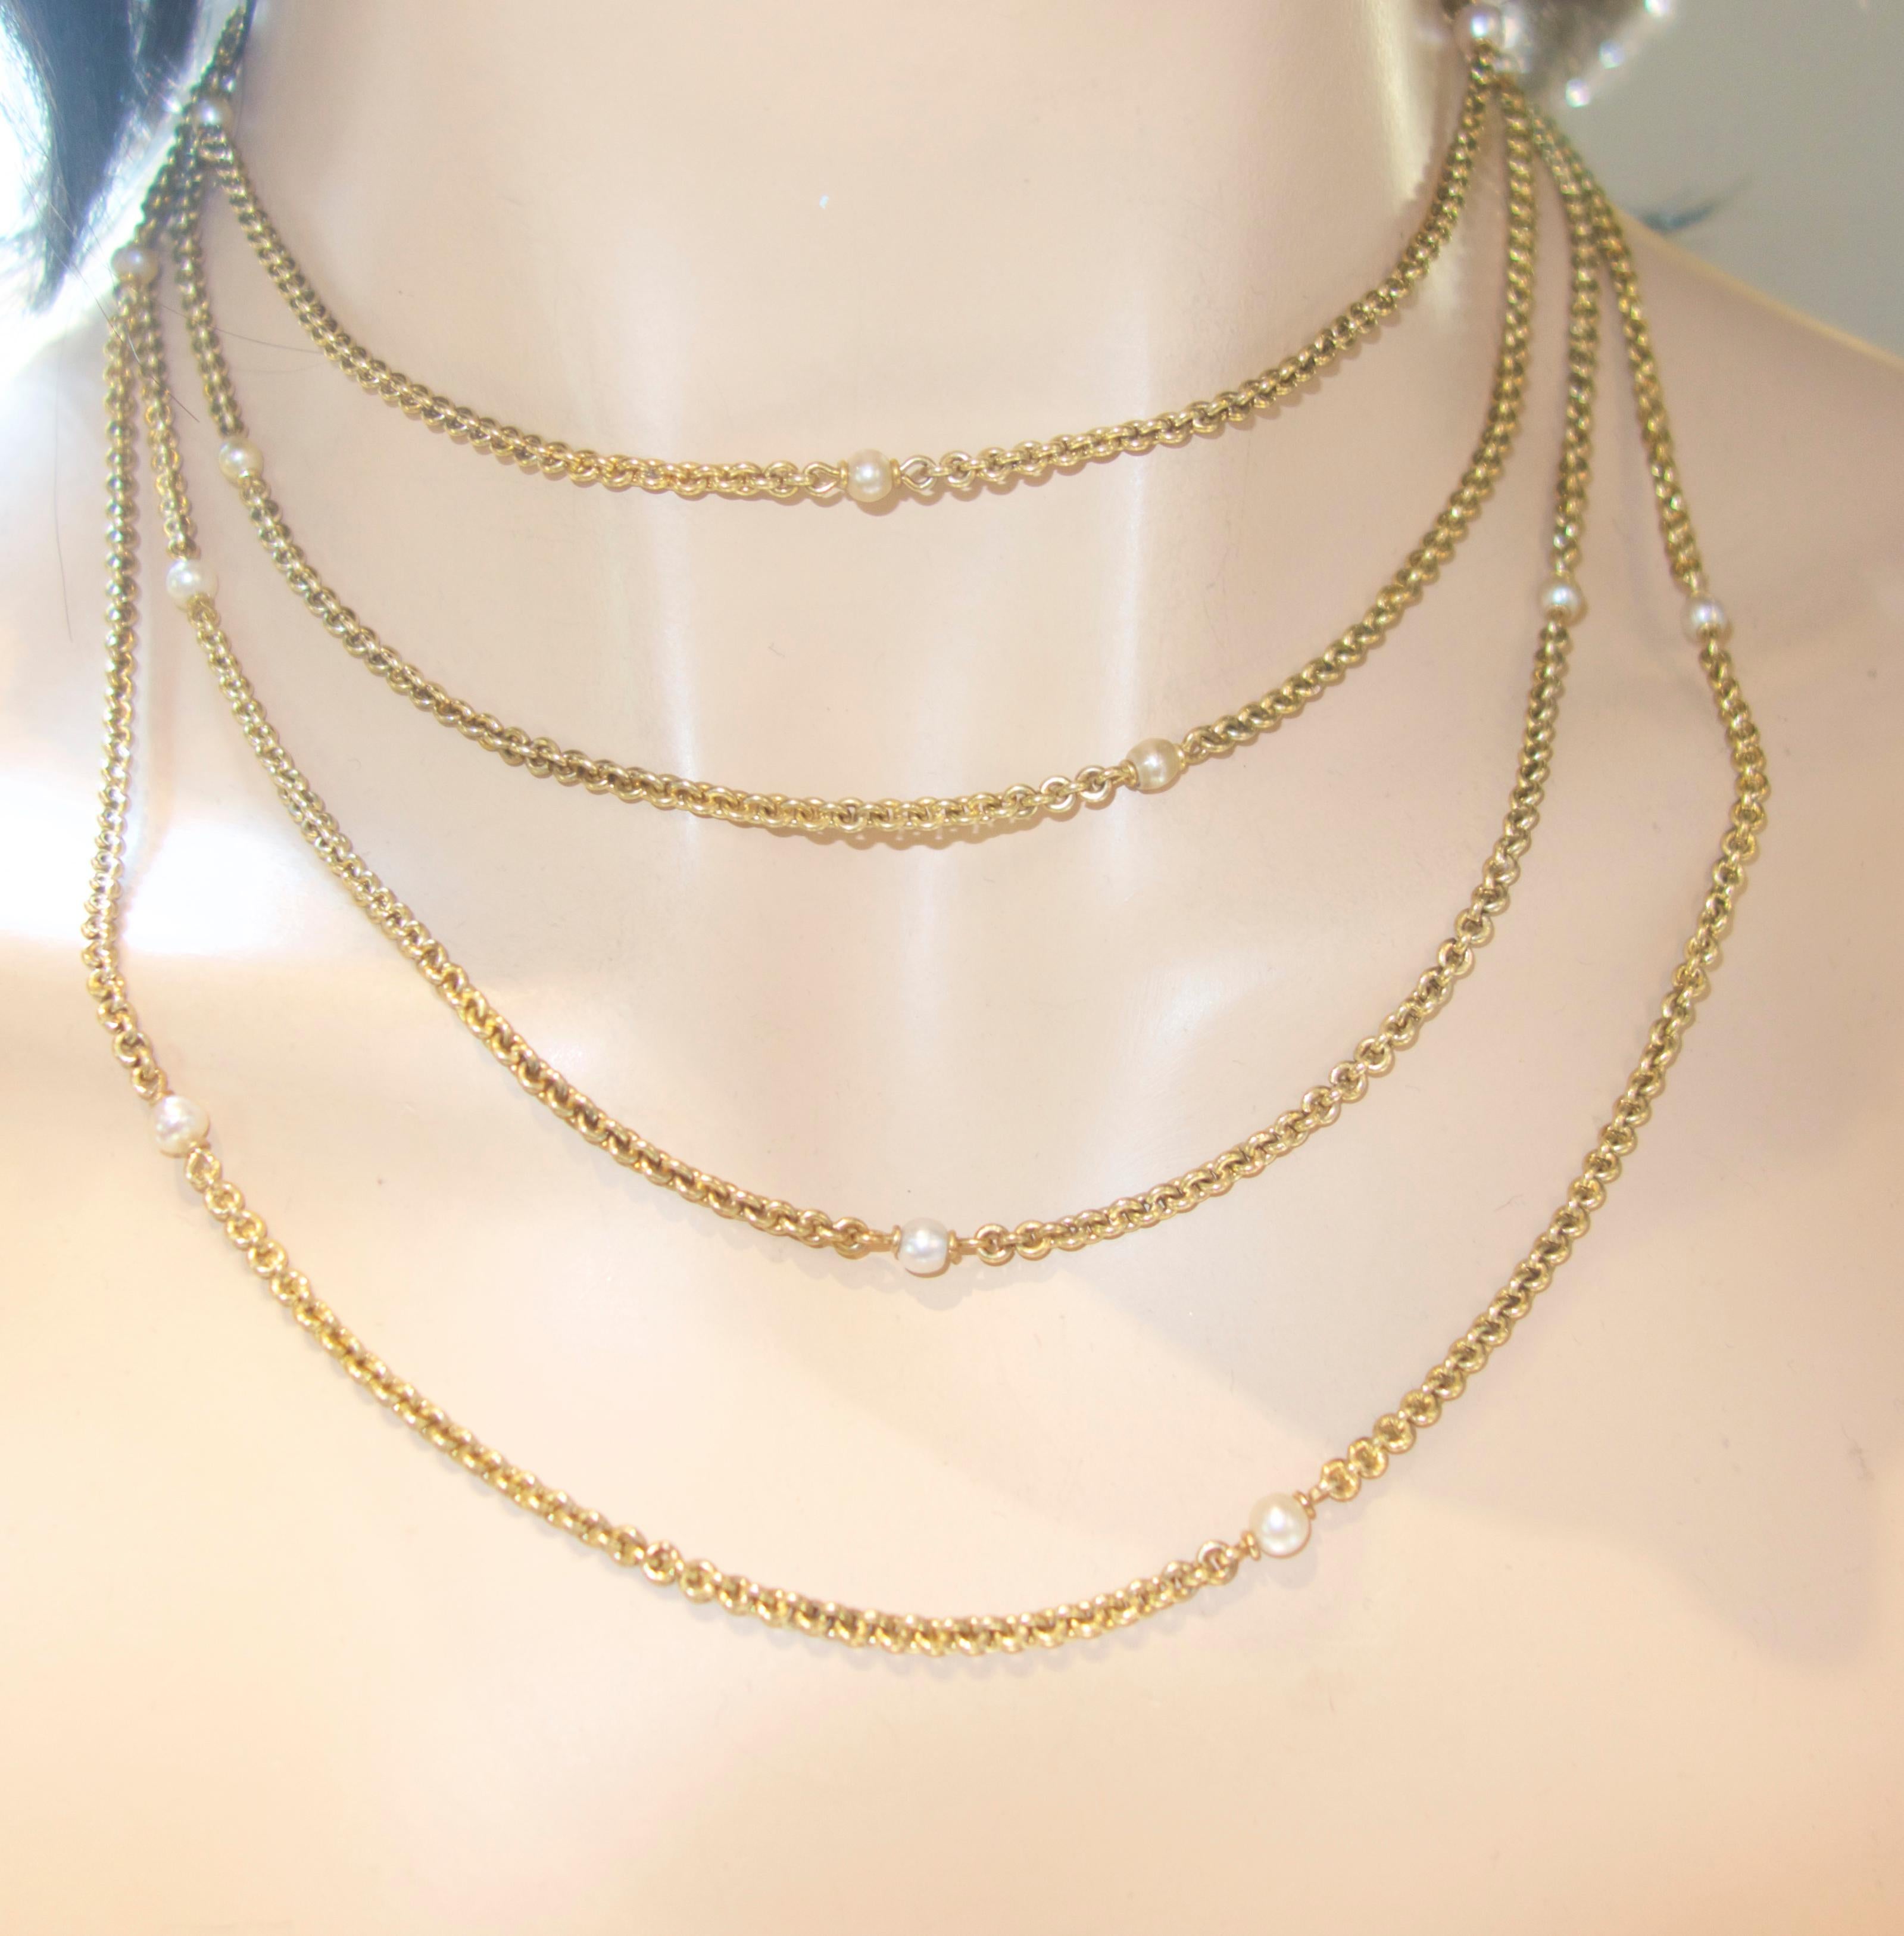 Women's or Men's Antique Gold and Natural Pearl Long Chain, circa 1890